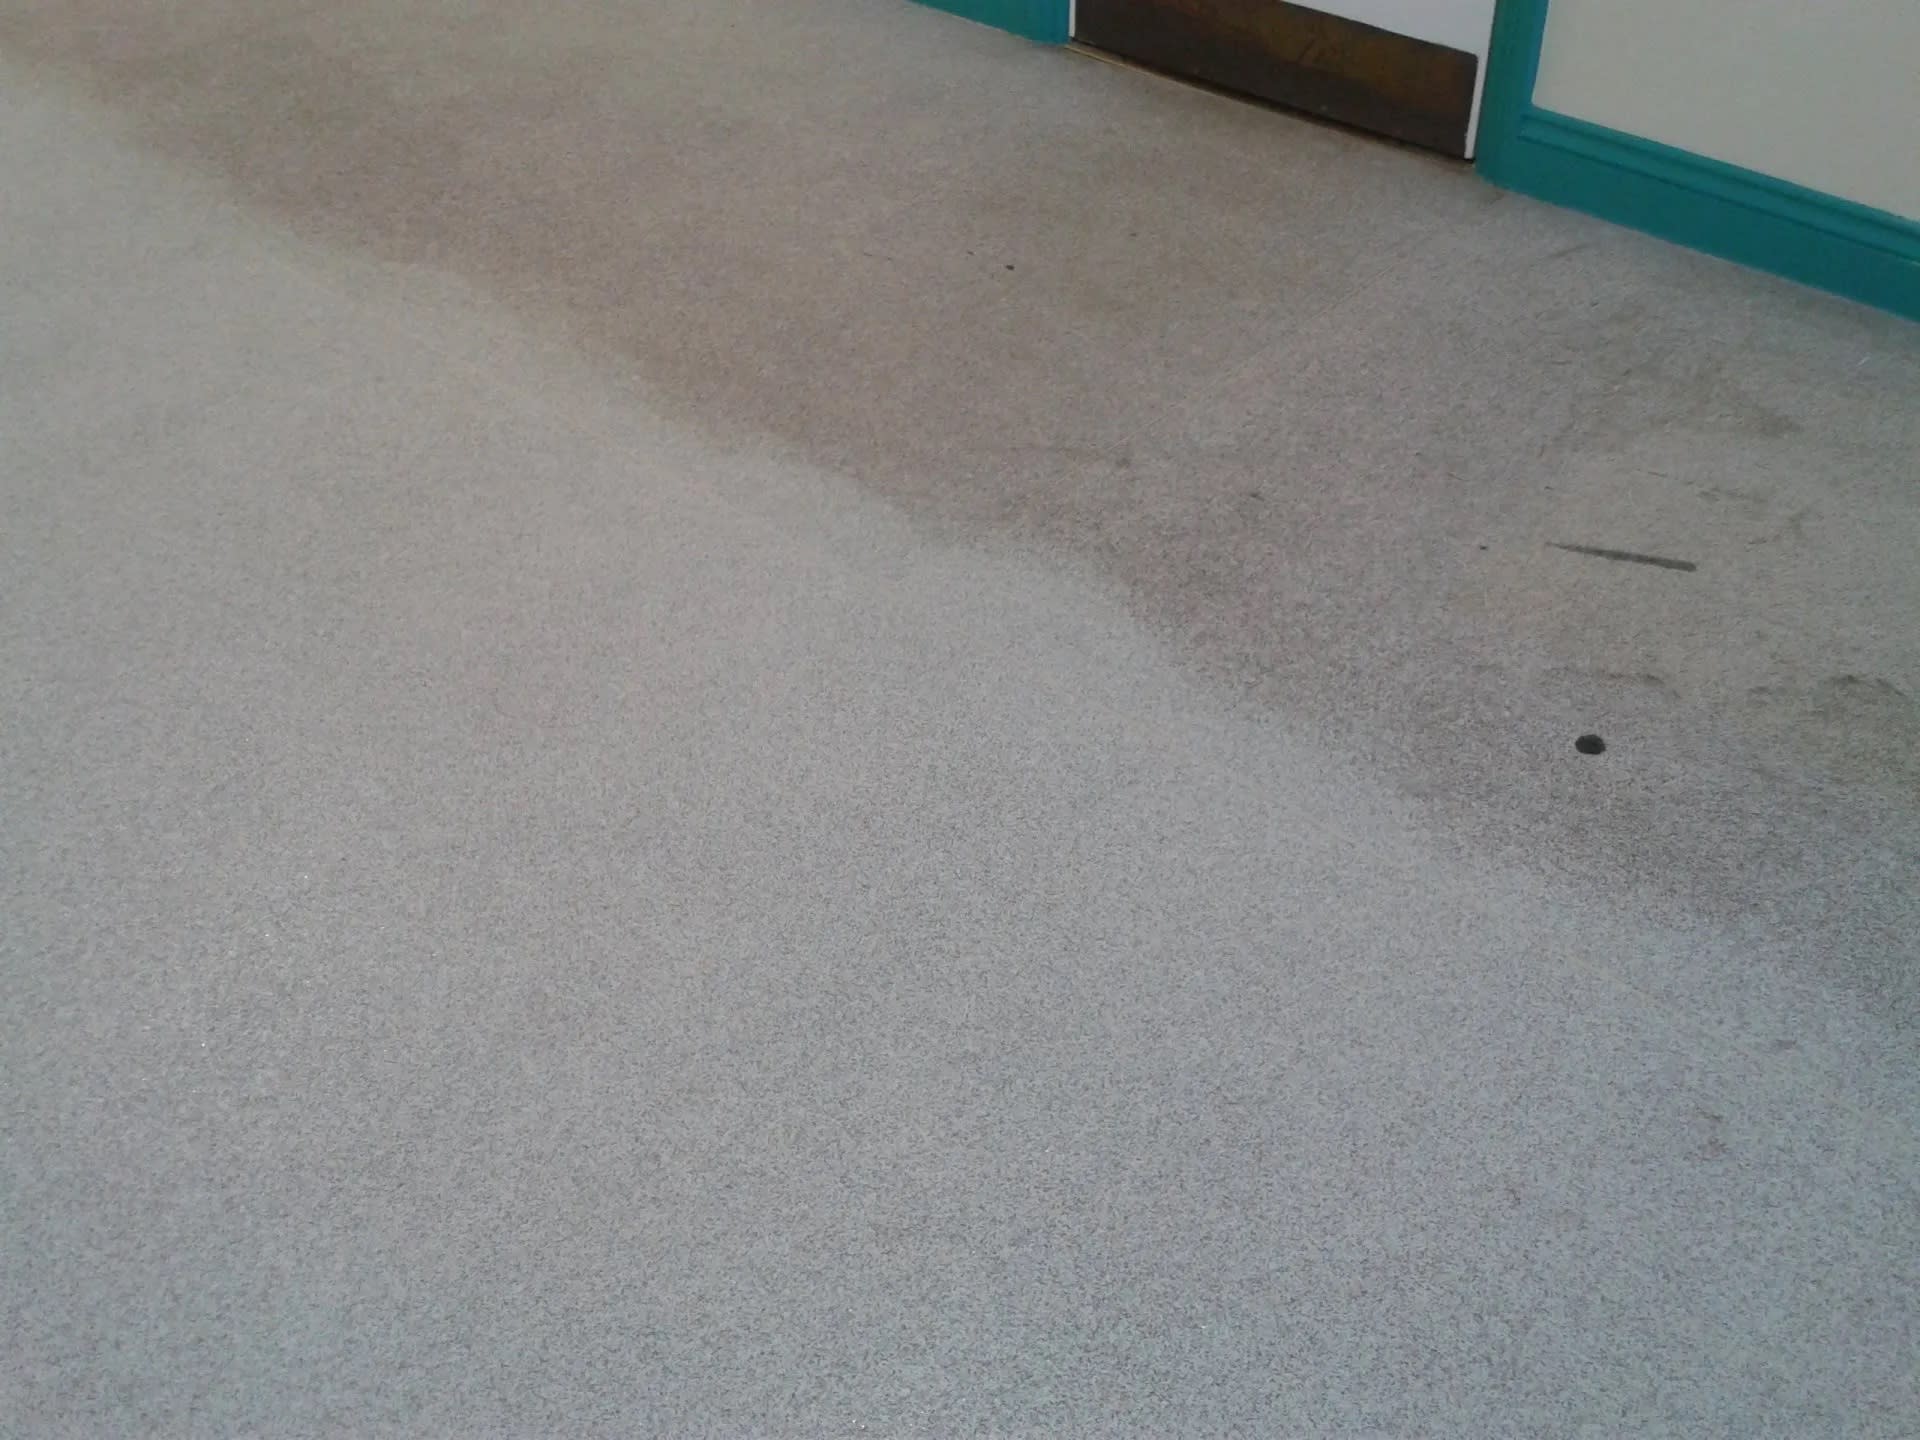 Images Extracta Carpet & Upholstery Cleaning.